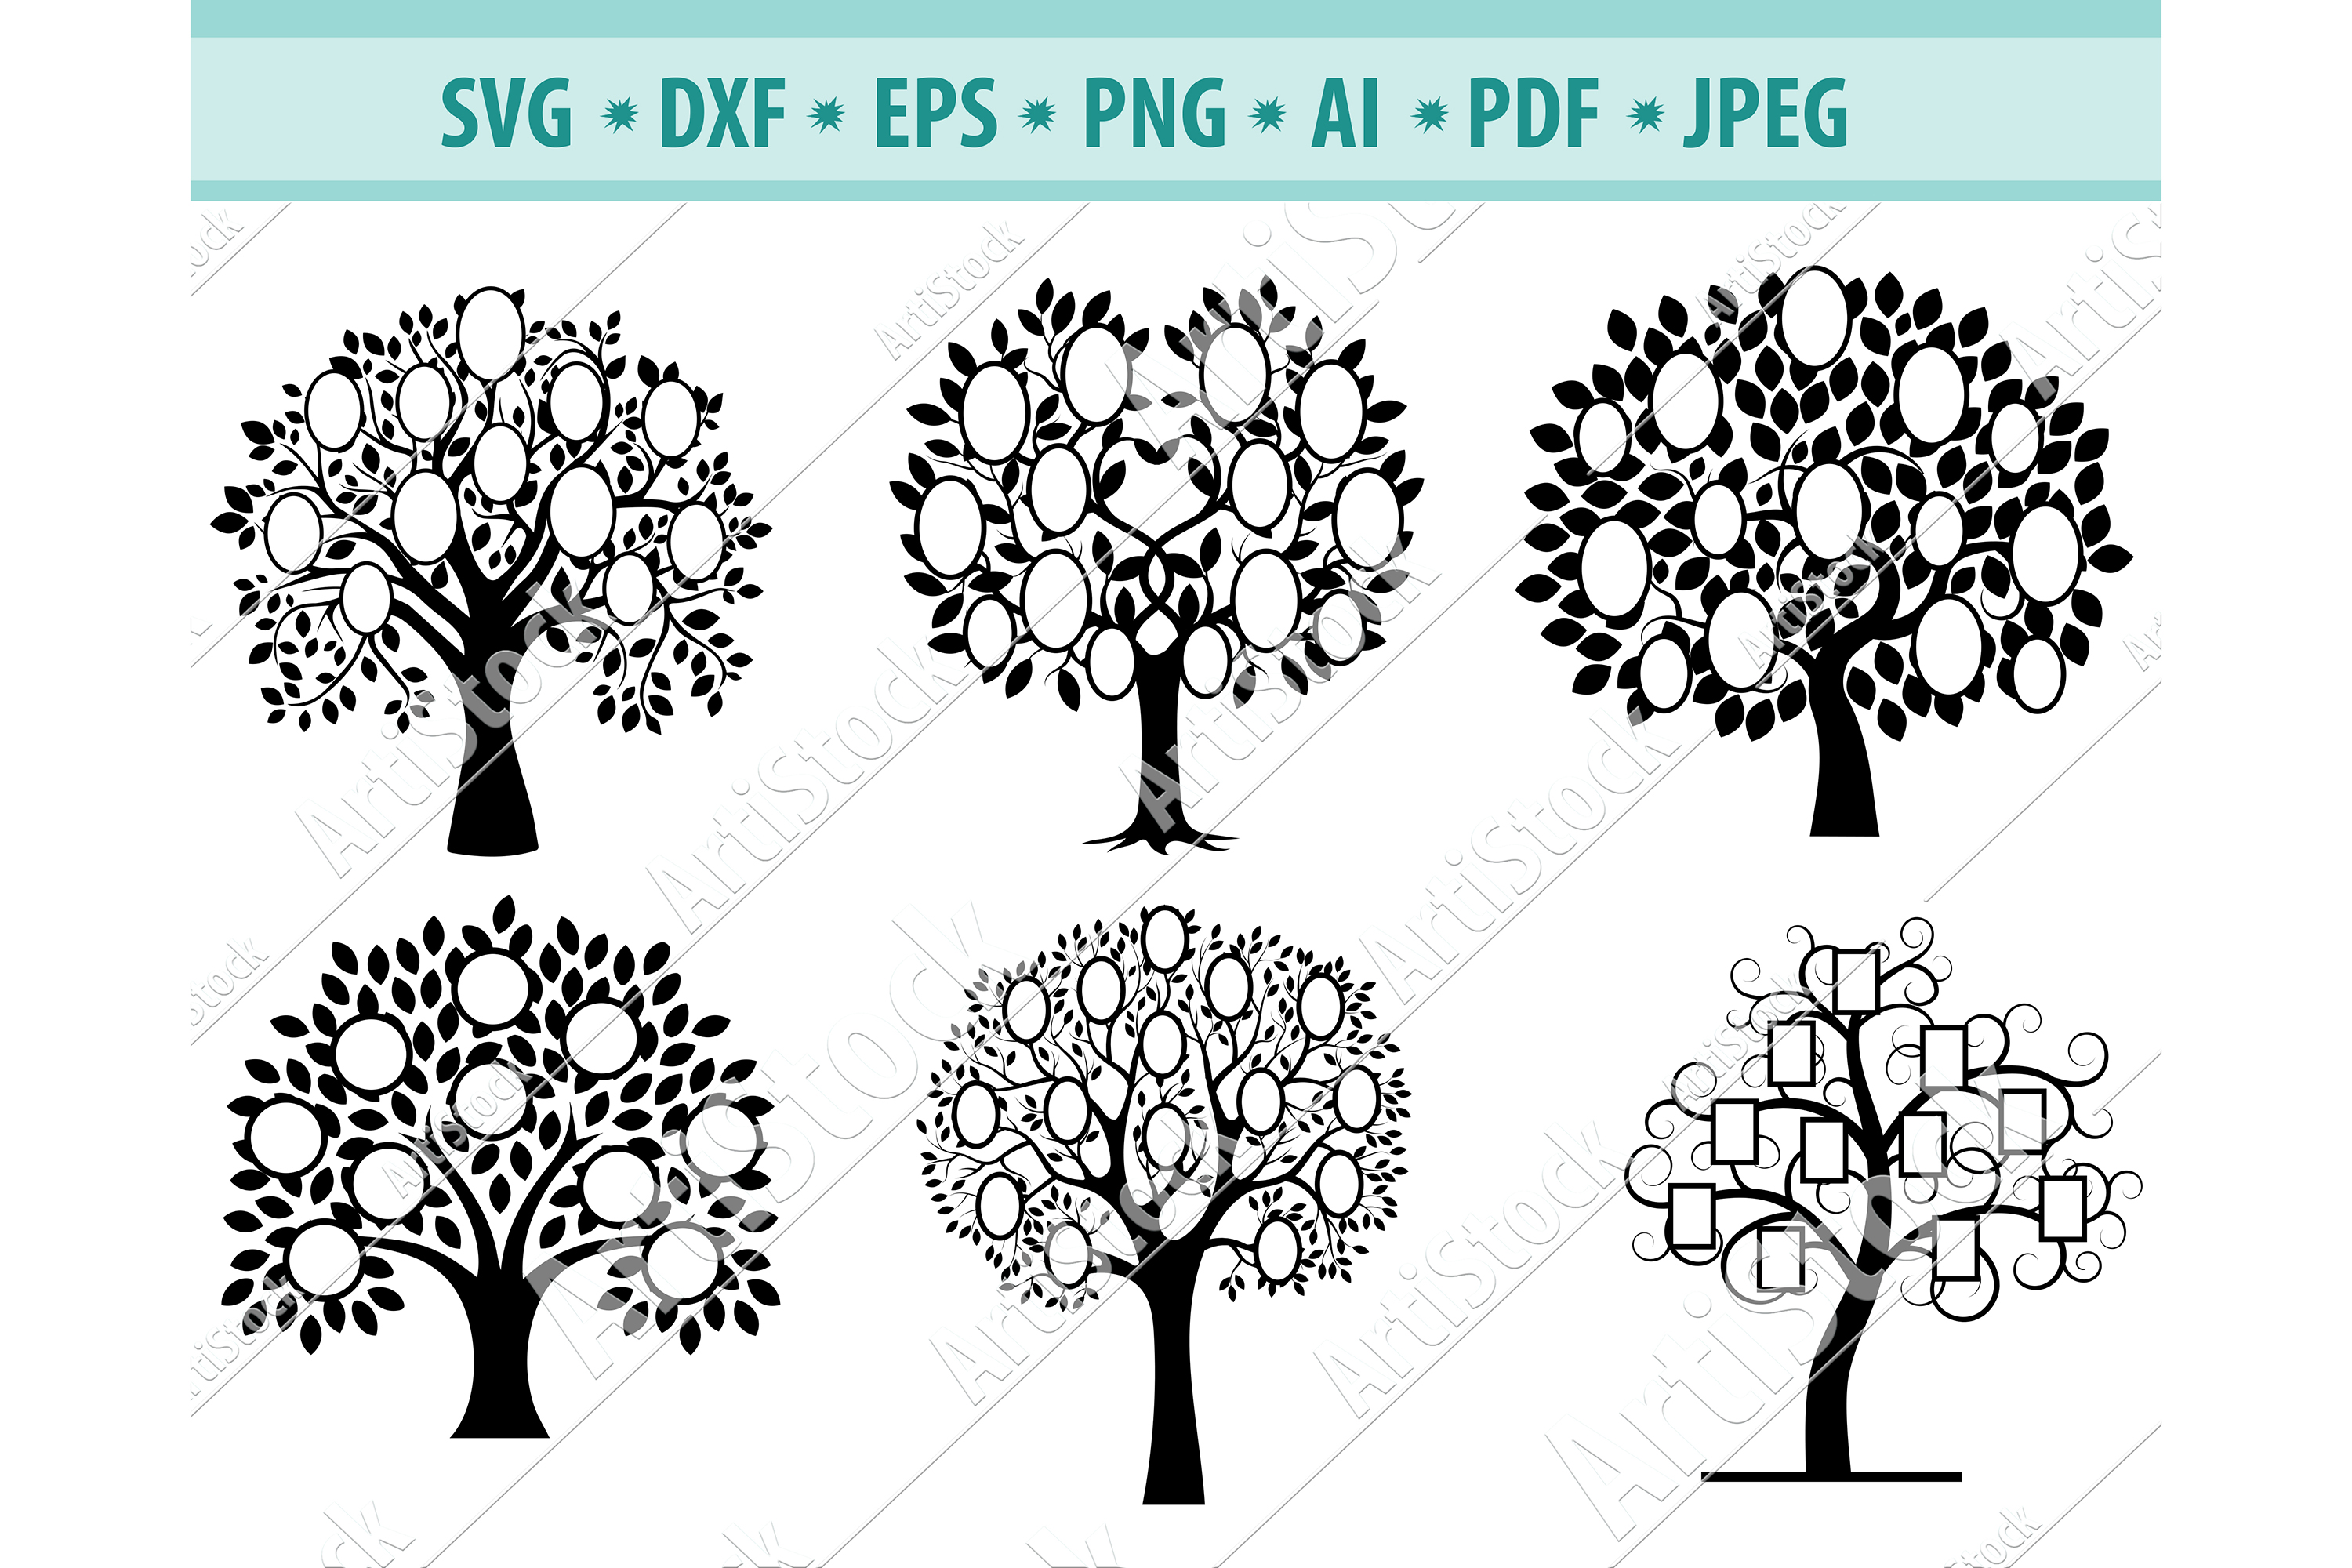 Download Tree svg, Tree clipart, Family tree Png, Nature Dxf, Eps